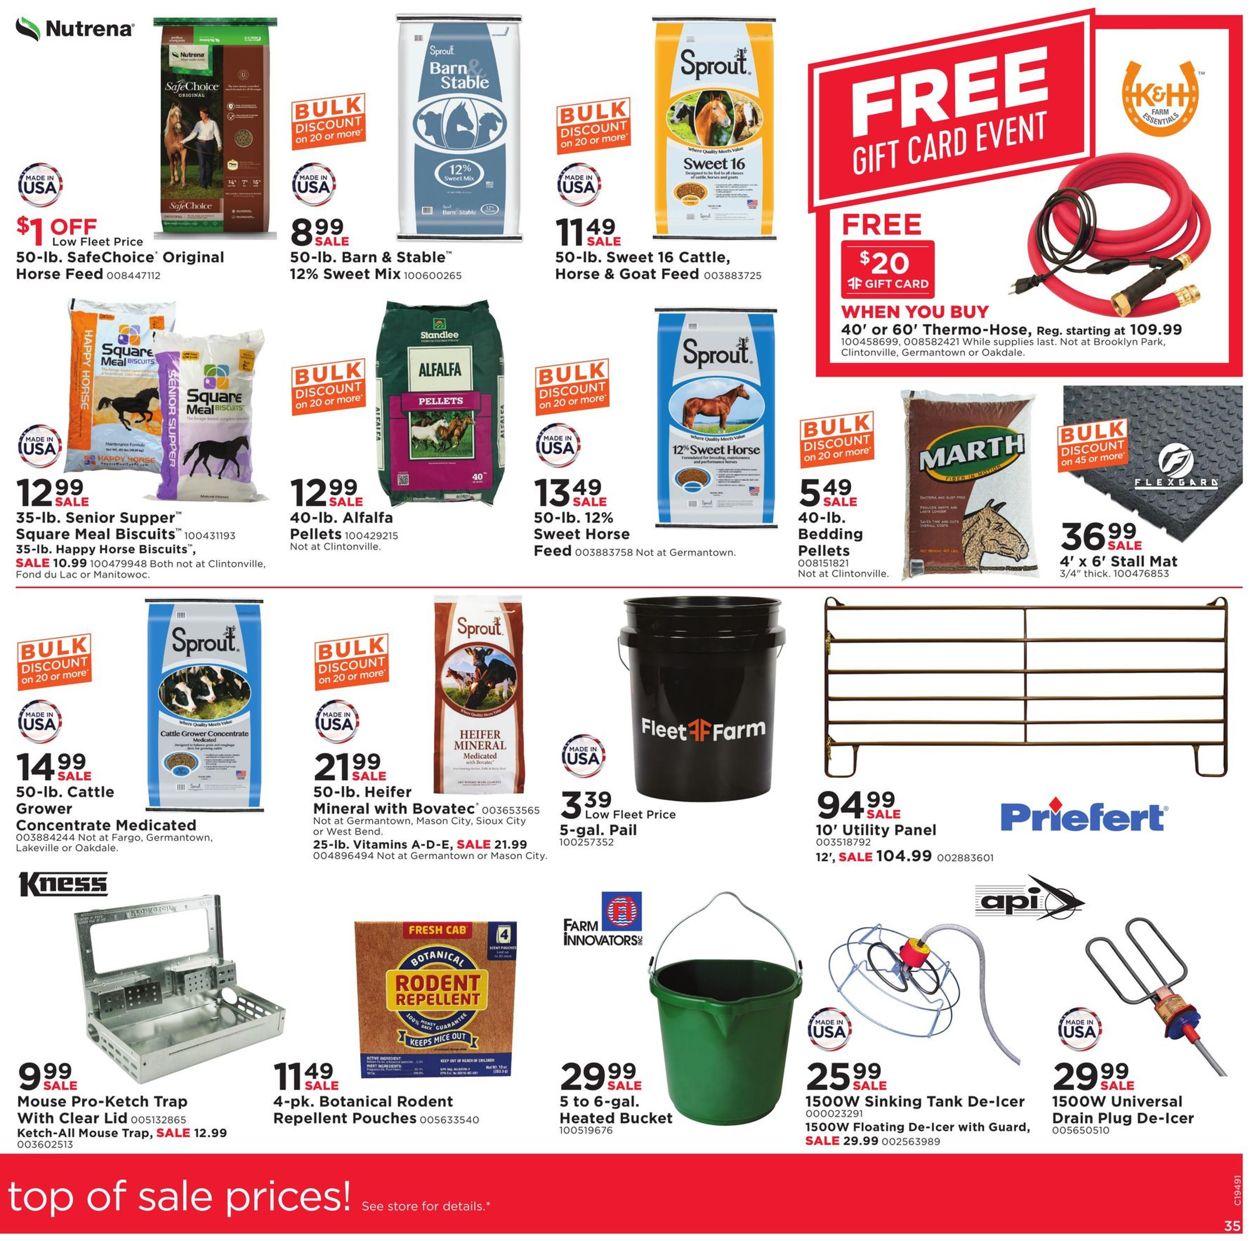 Mills Fleet Farm Current weekly ad 11/29 - 12/07/2019 [35] - frequent ...